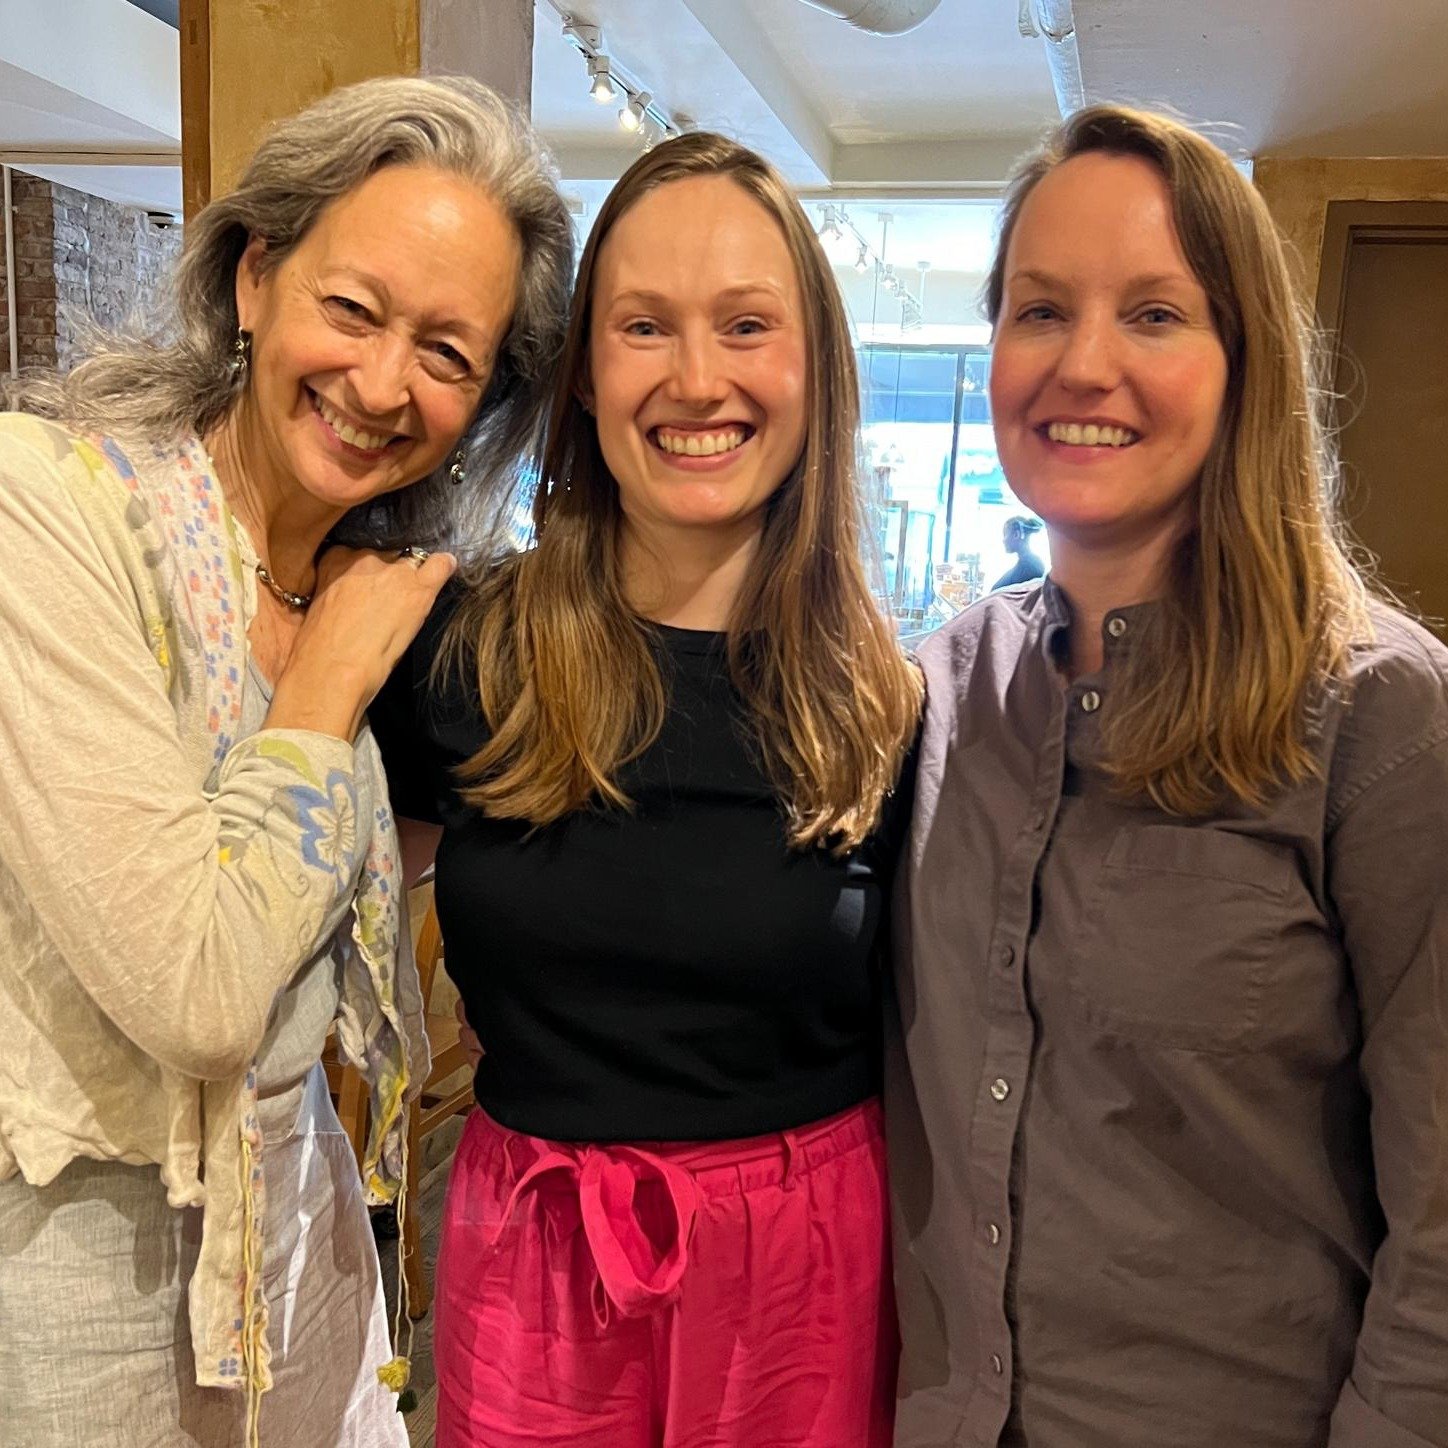 Congratulations to Christy Maerlender, Jenn and Suzi's dance/movement therapy intern at MSK kids this year! Christy is a graduate of the Sarah Lawrence College. She did a terrific job and we welcome her into the DMT community! #dancemovementtherapy #